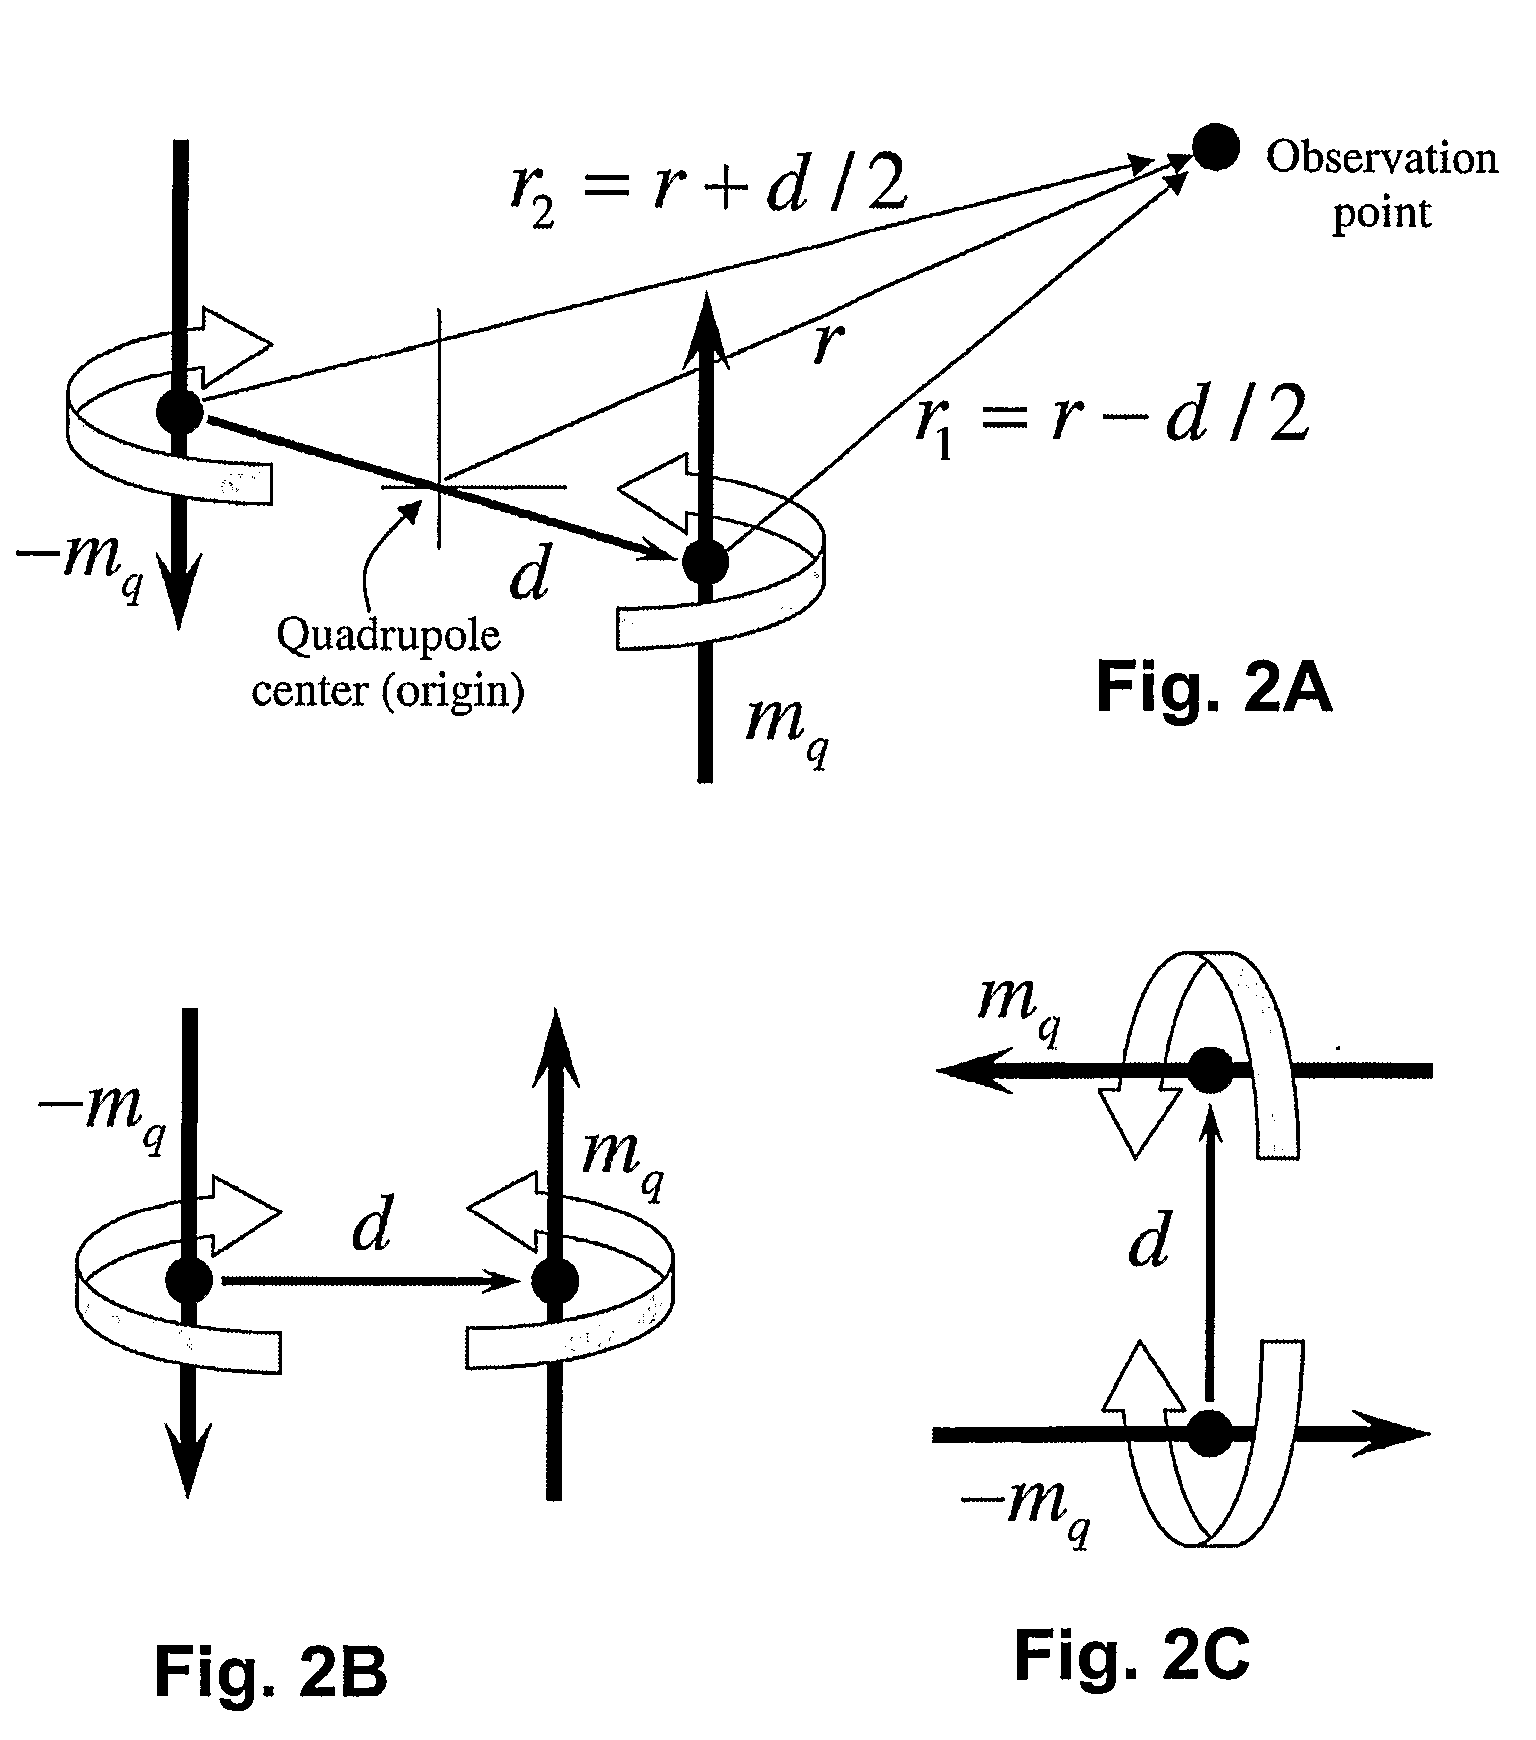 Localization of capsule with a synthetic source of quadrupoles and dipoles